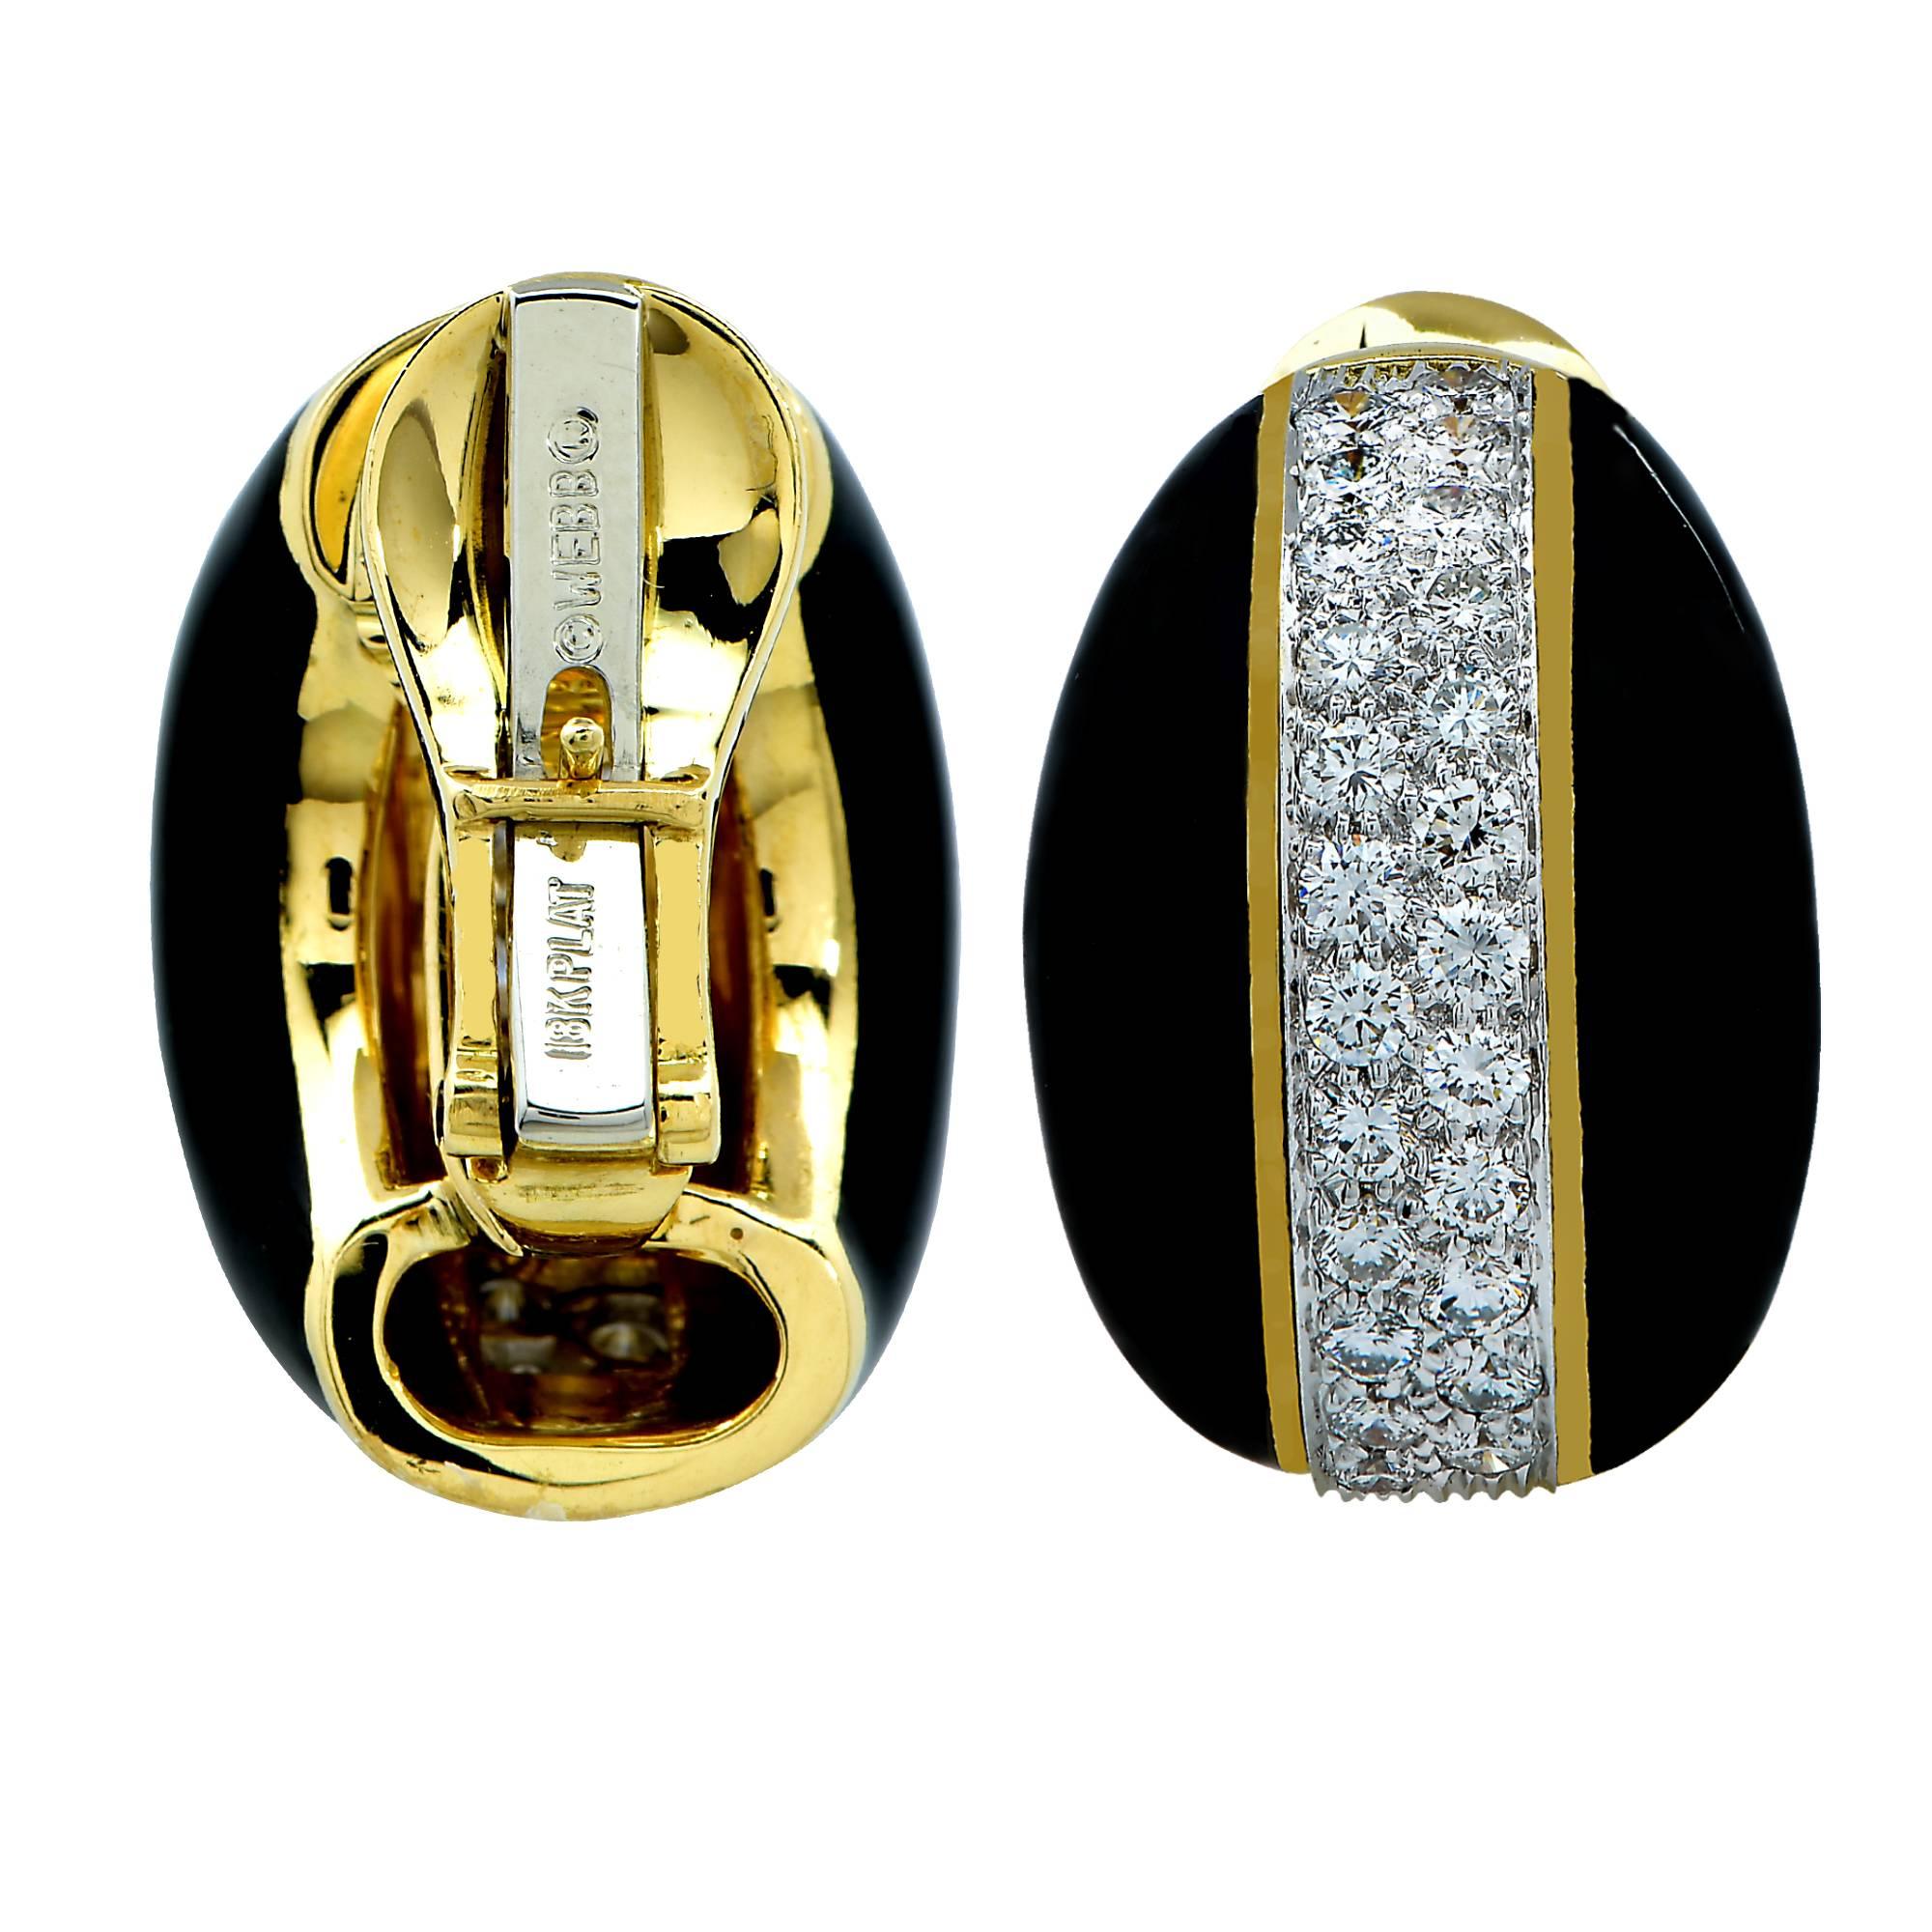 18K yellow gold David Webb earrings containing approximately 2.50cts of round brilliant cut diamonds, F color and VS clarity. These spectacular earrings are accented by black enamel. 

Our pieces are all accompanied by an appraisal performed by one